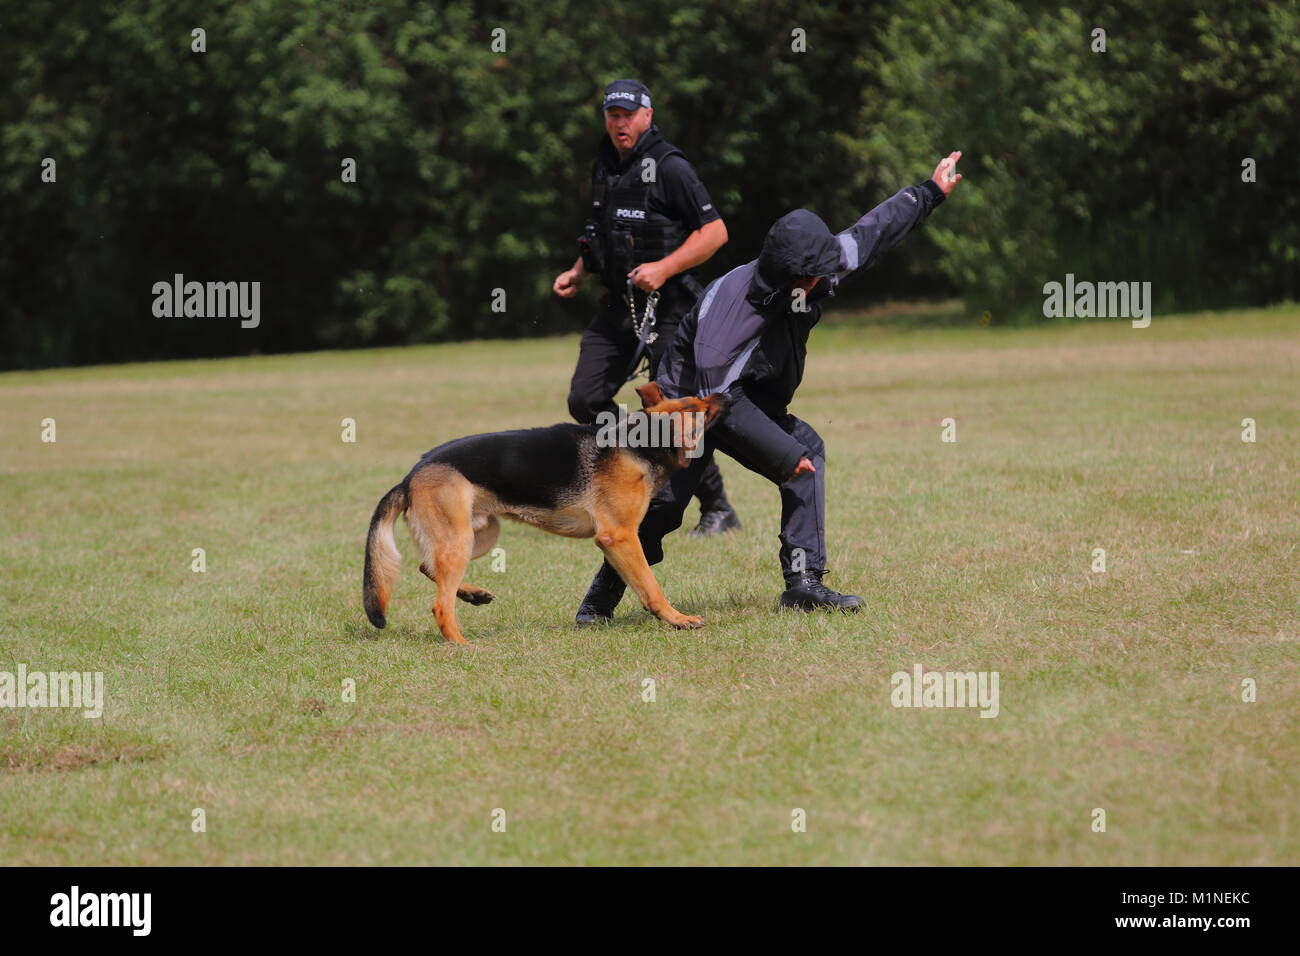 A police dog attacks a man during a training exercise Stock Photo